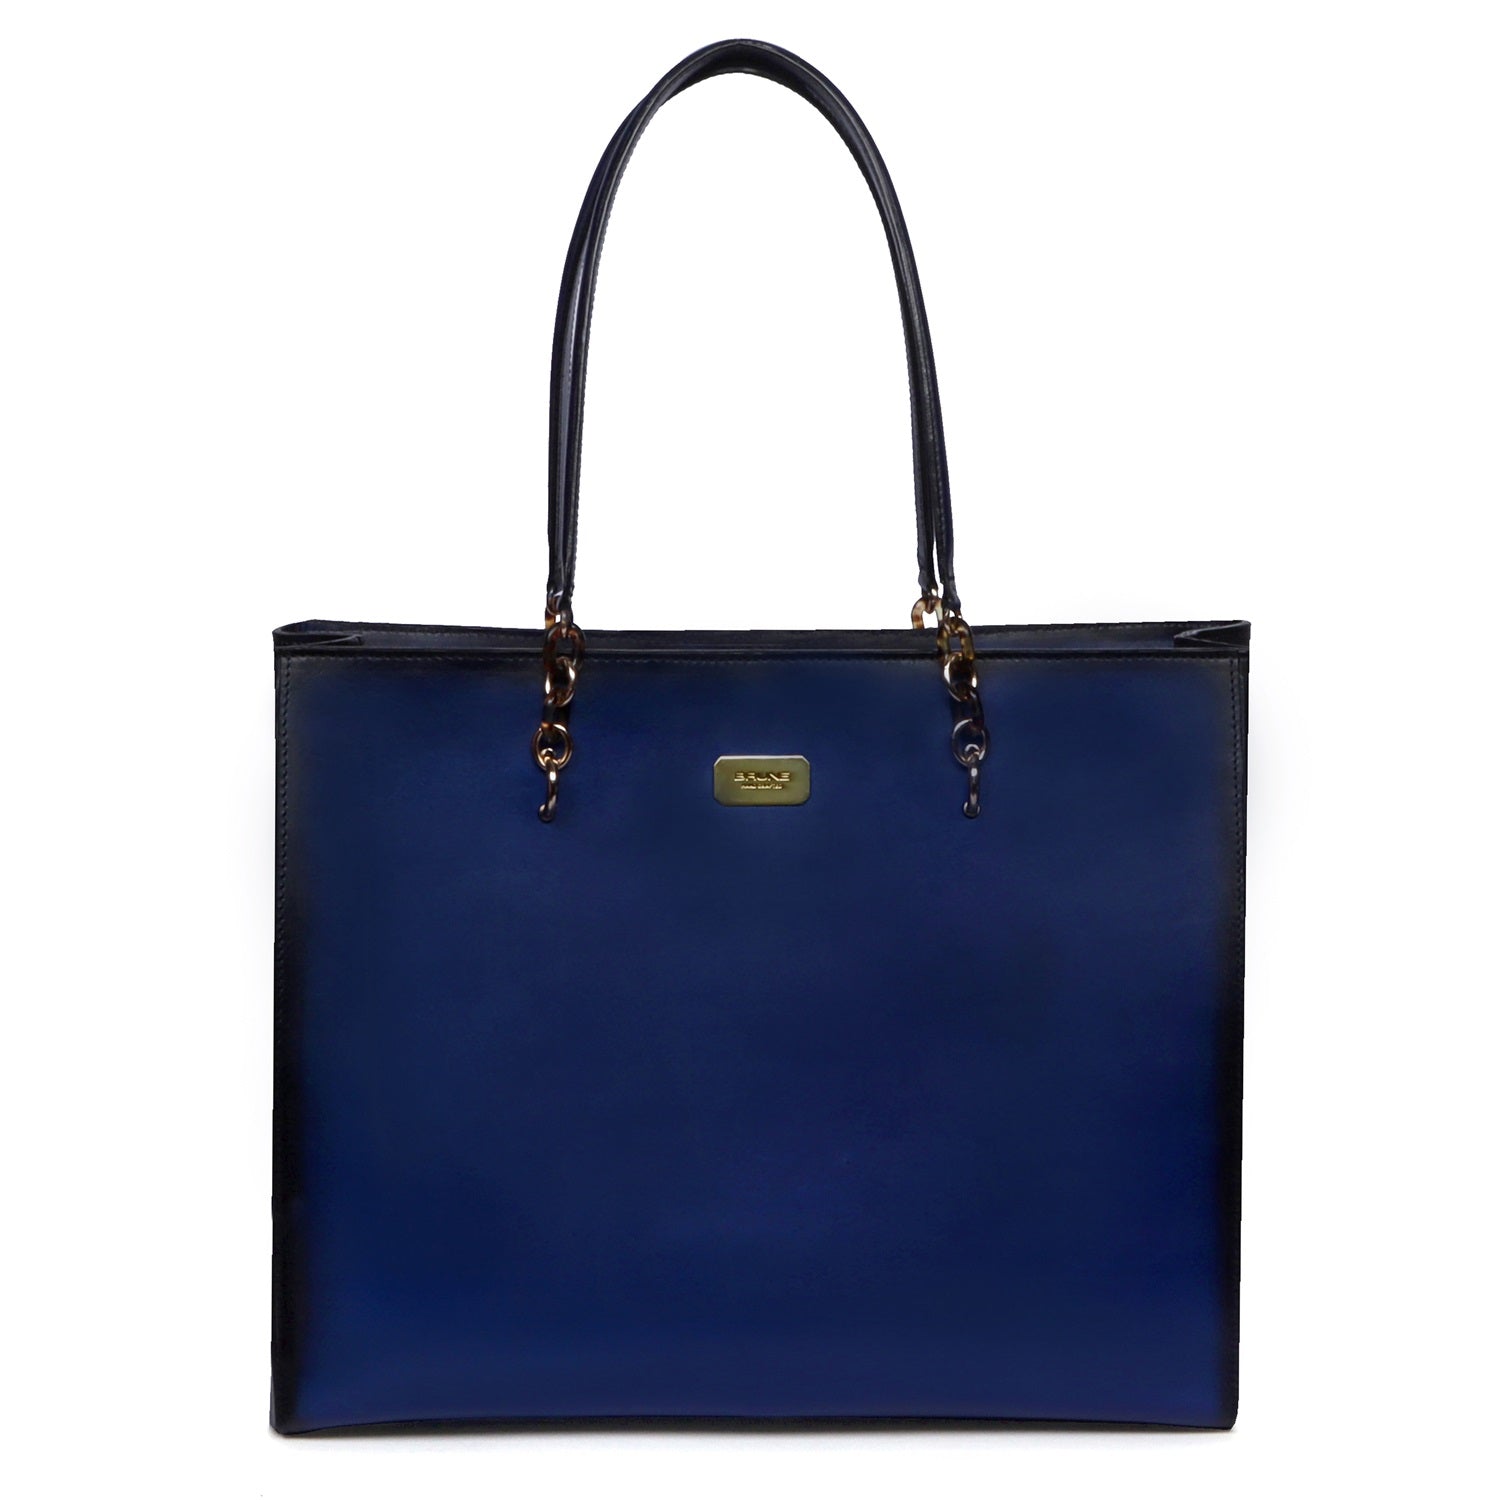 Kate Spade Speedy Bag Navy Blue Embossed Leather Zippered Tote Gold HW